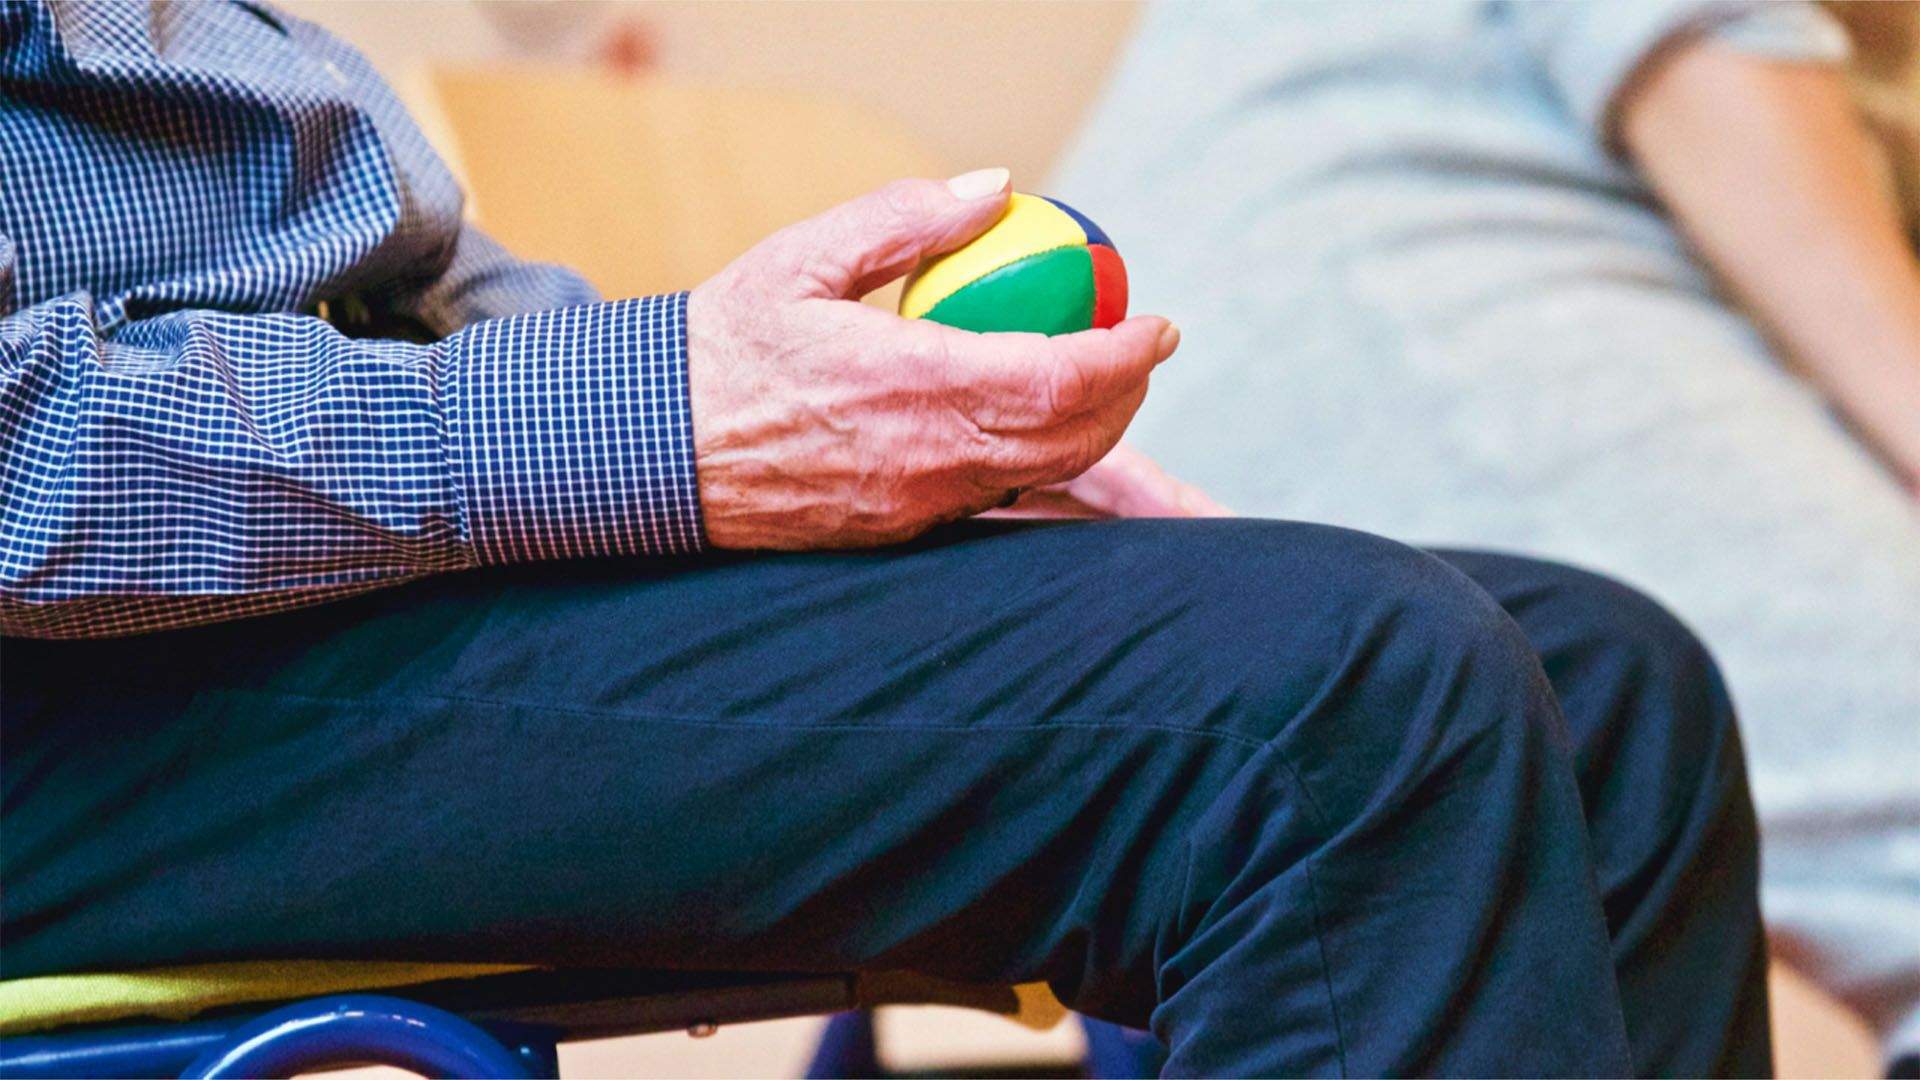 Physiotherapy for the Eldery Population